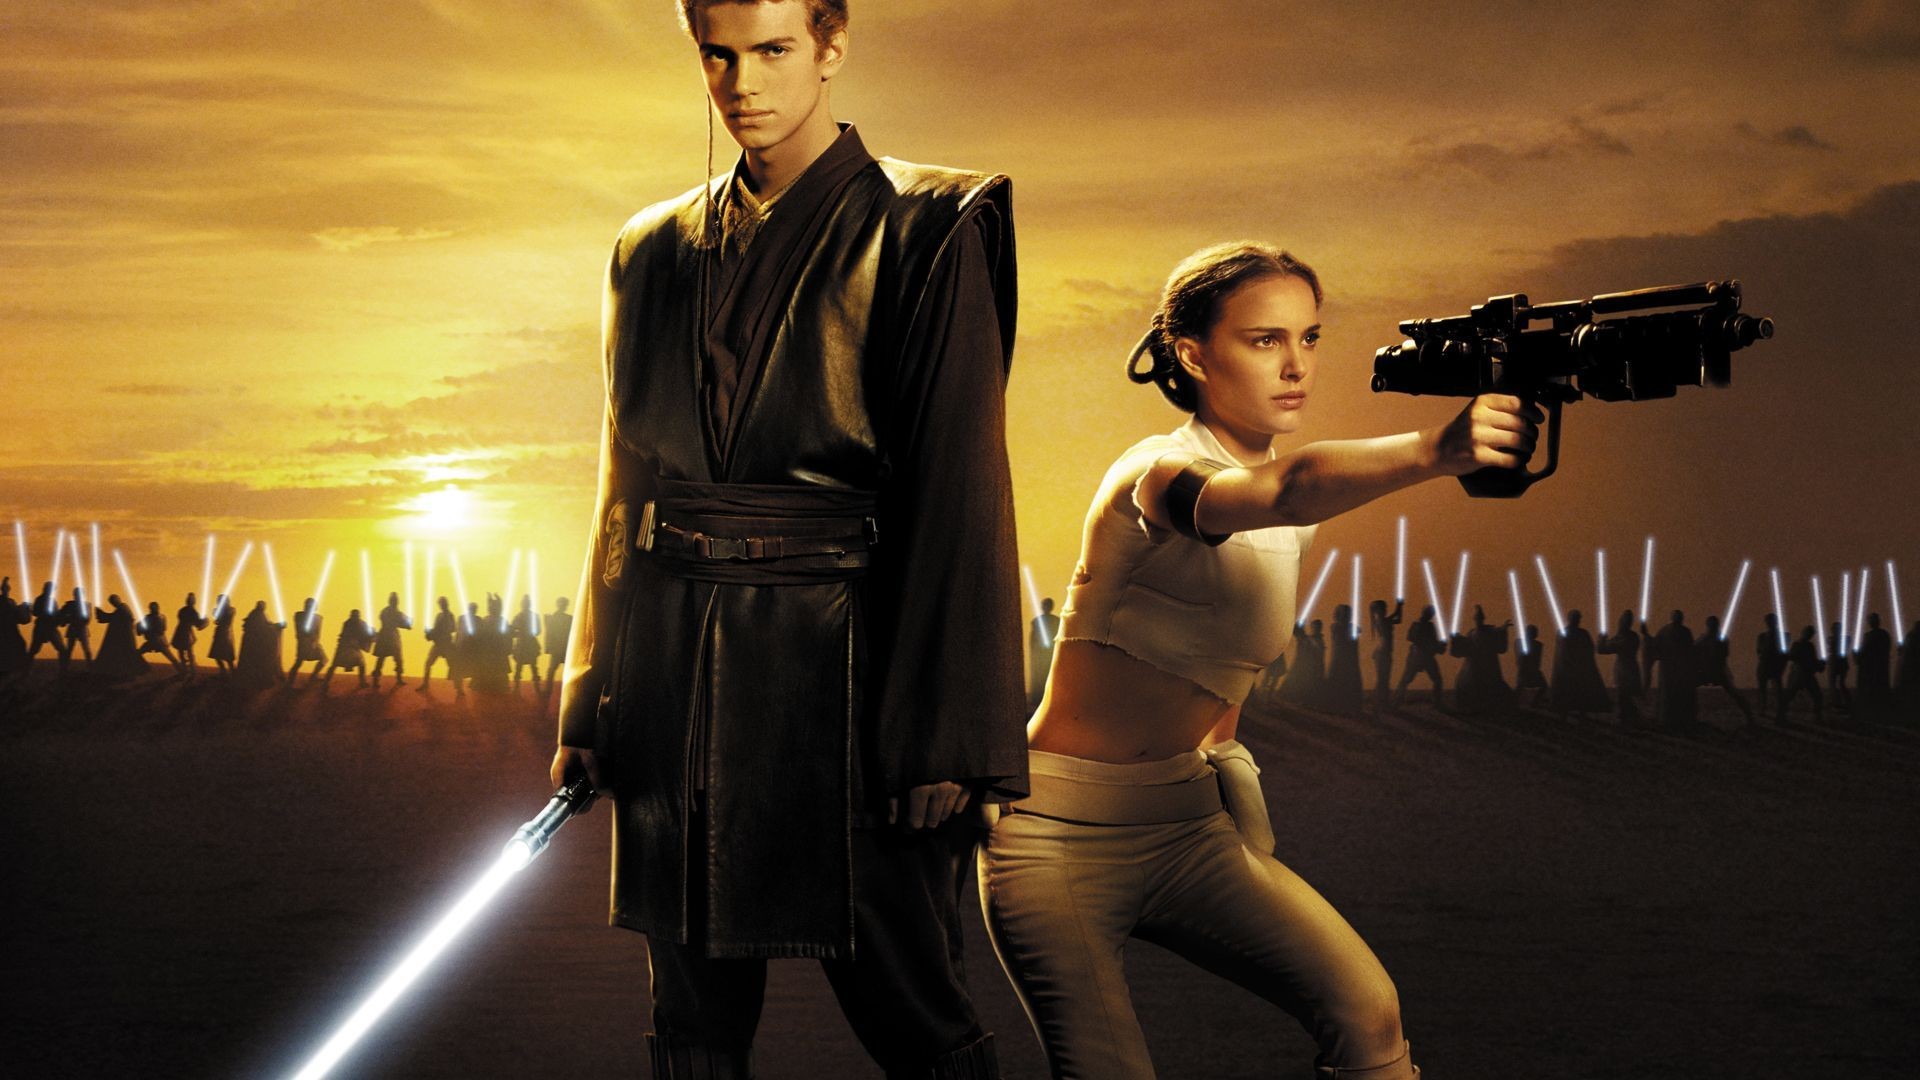 HQ Star Wars Episode II: Attack Of The Clones Wallpapers | File 254.66Kb